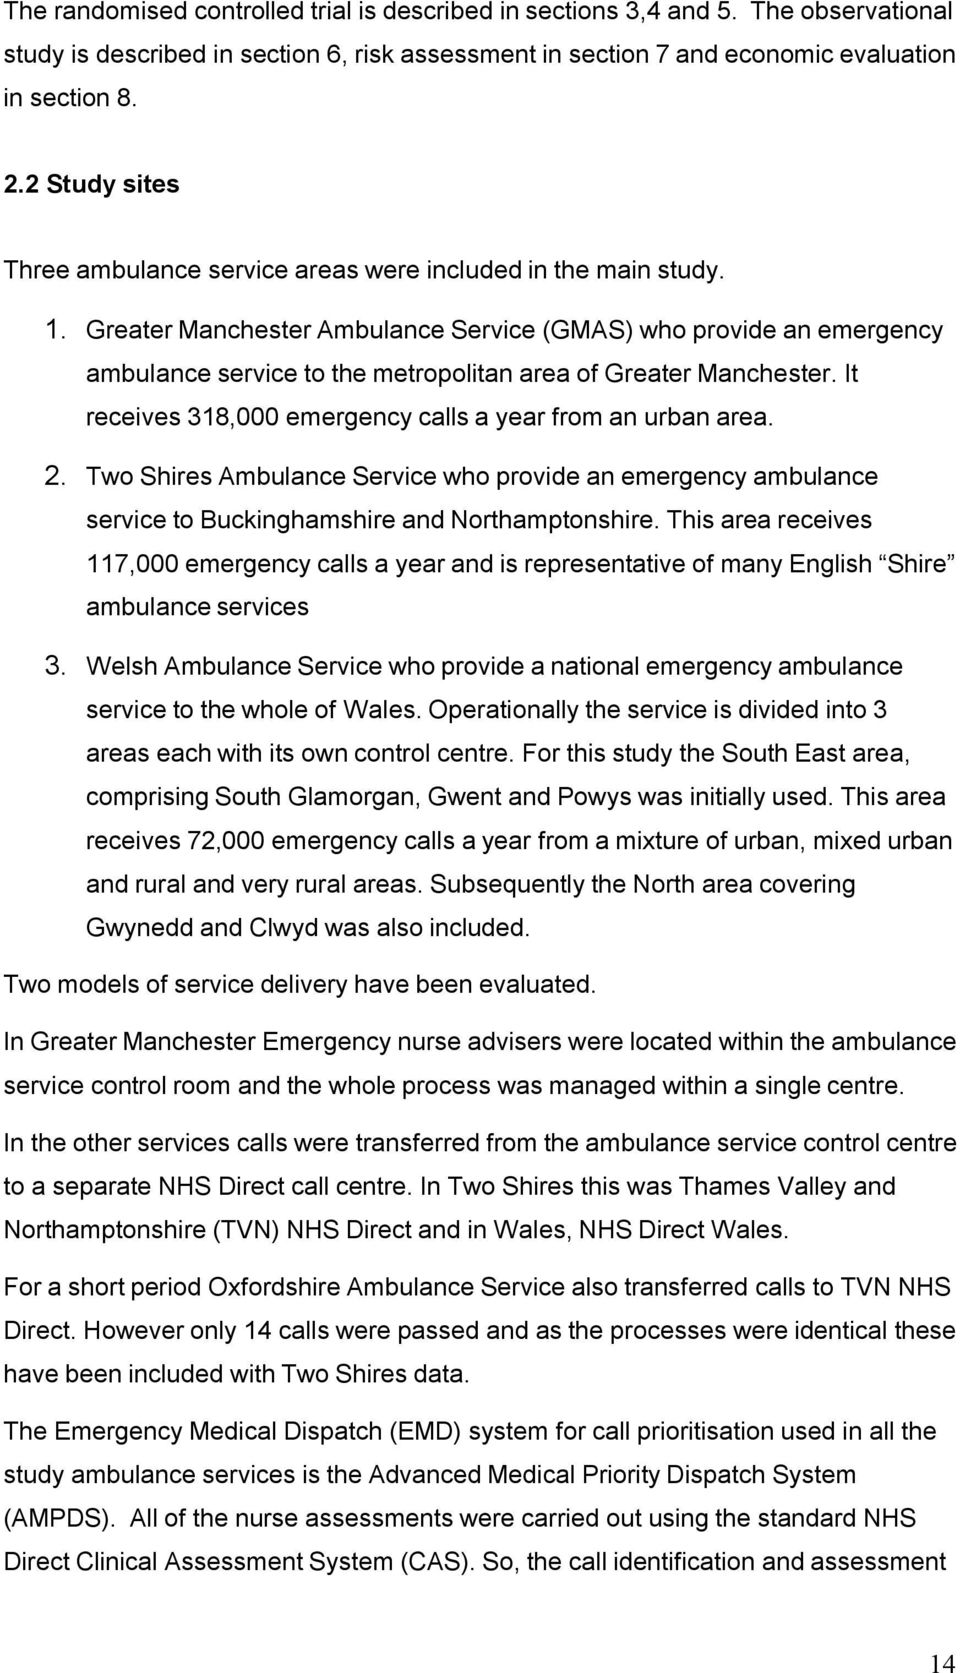 Greater Manchester Ambulance Service (GMAS) who provide an emergency ambulance service to the metropolitan area of Greater Manchester. It receives 318,000 emergency calls a year from an urban area. 2.